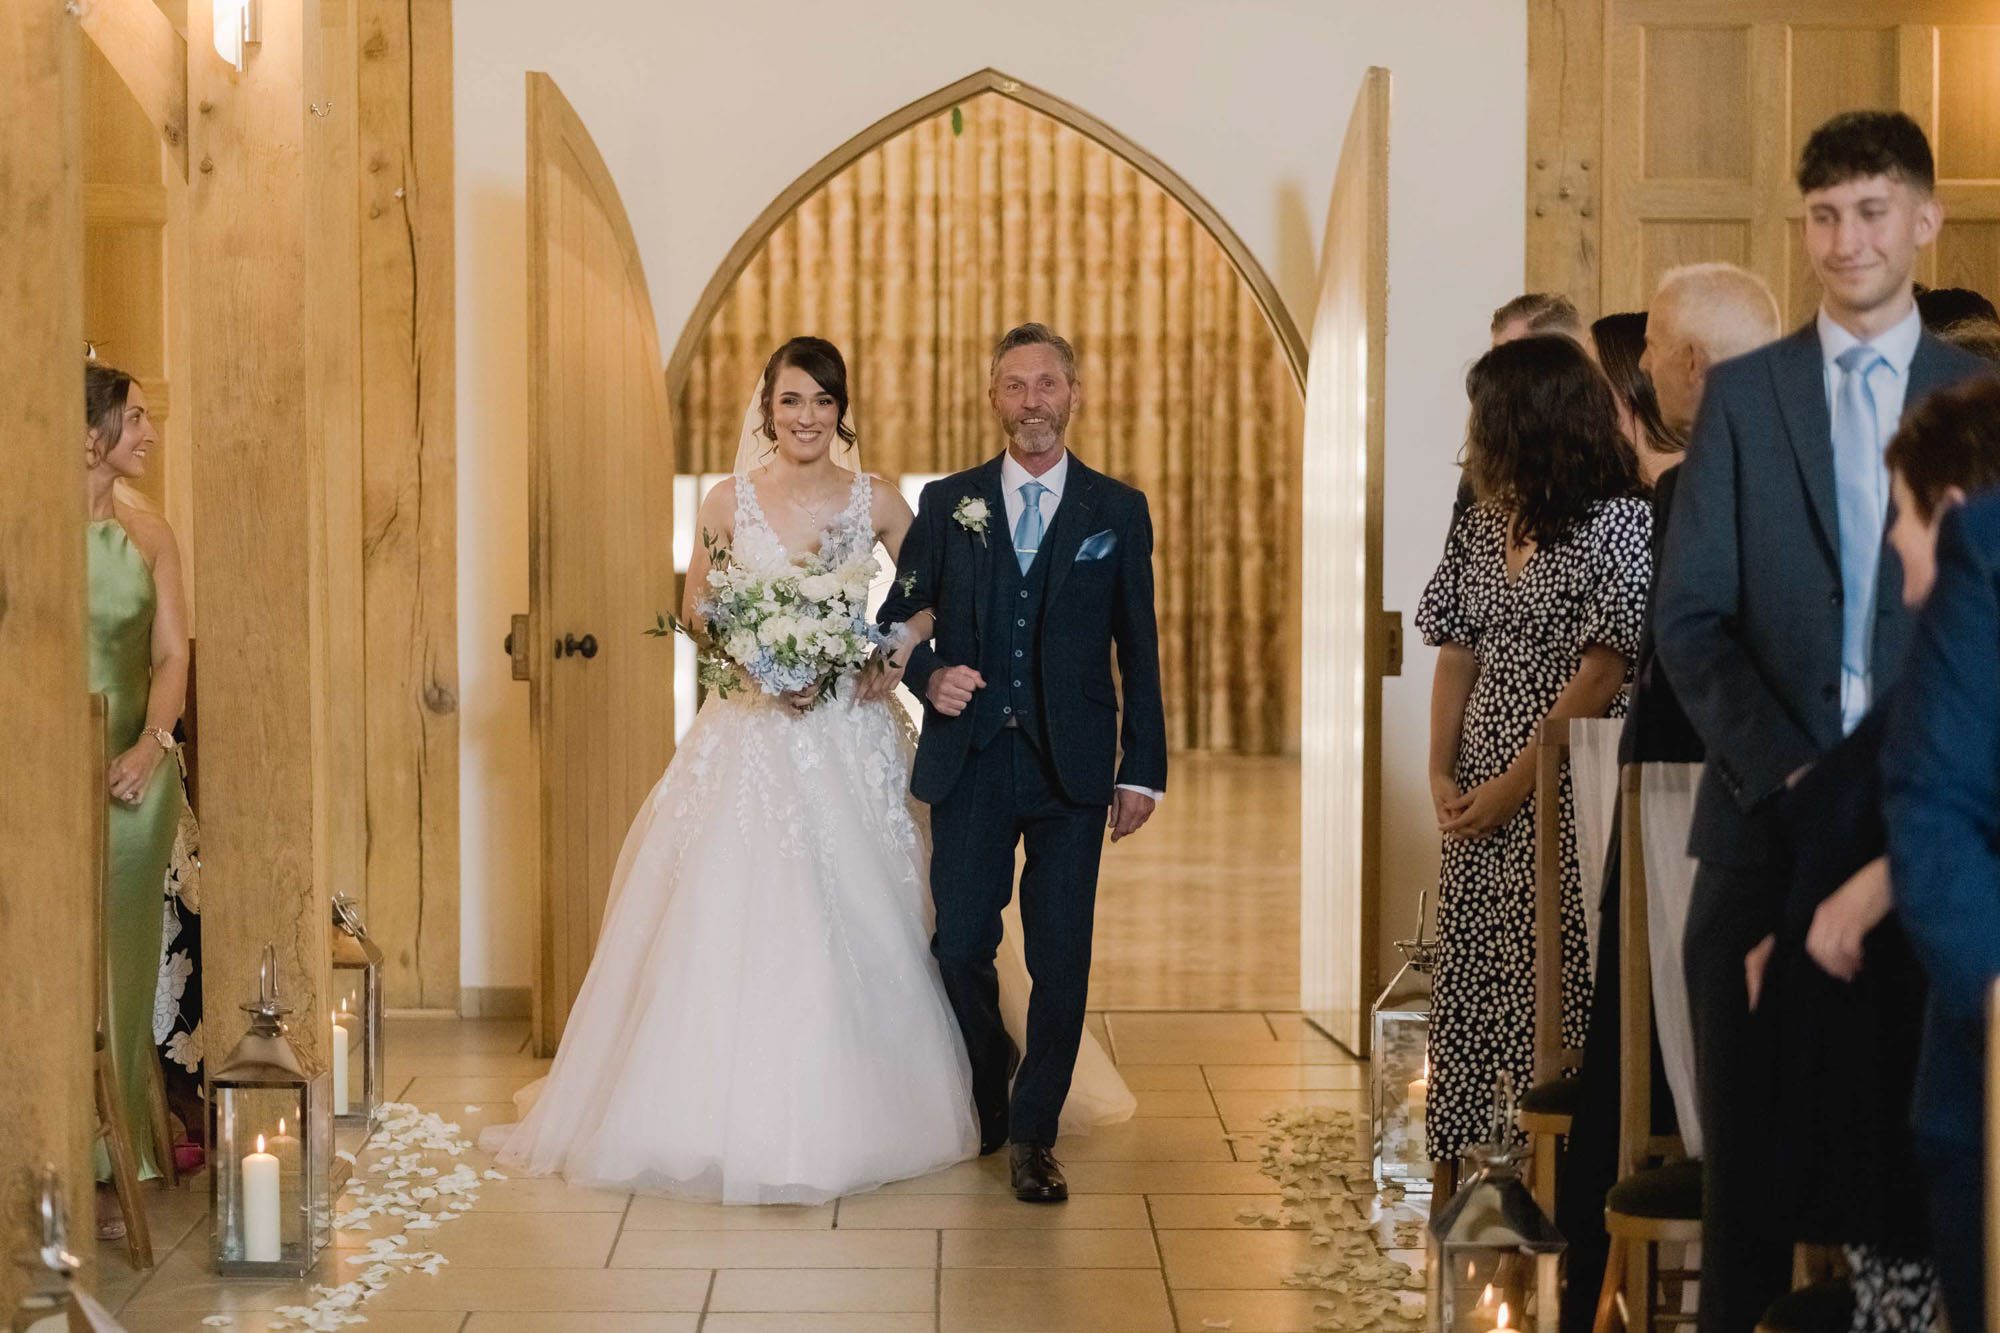 A bride walks down the asile with her father on her wedding day at Rivervale Barn in Hampshire.